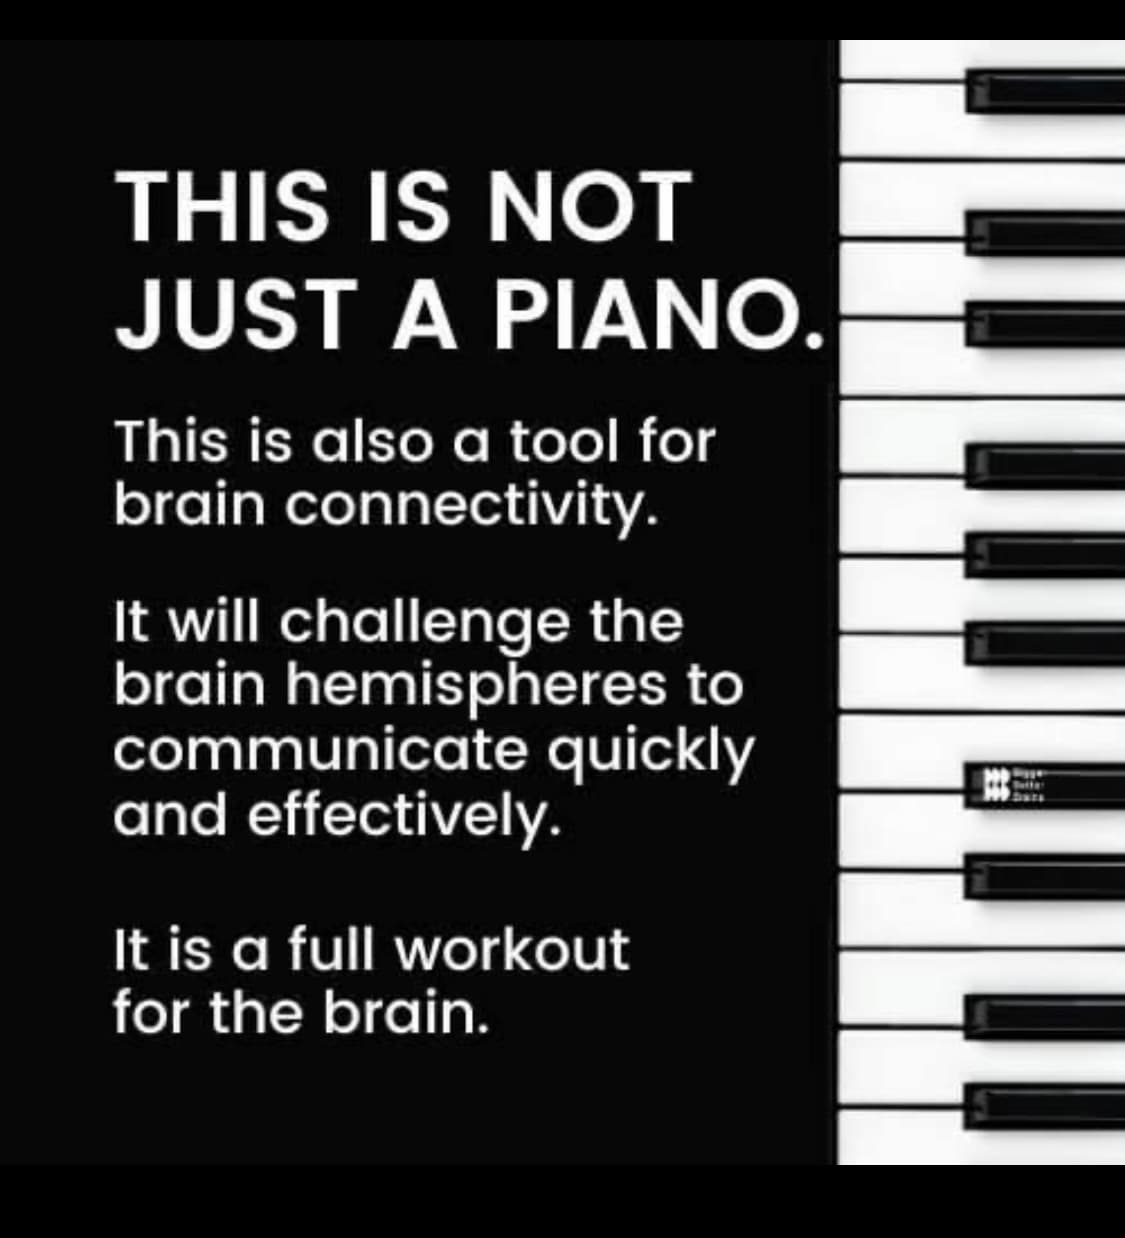 Not just a piano